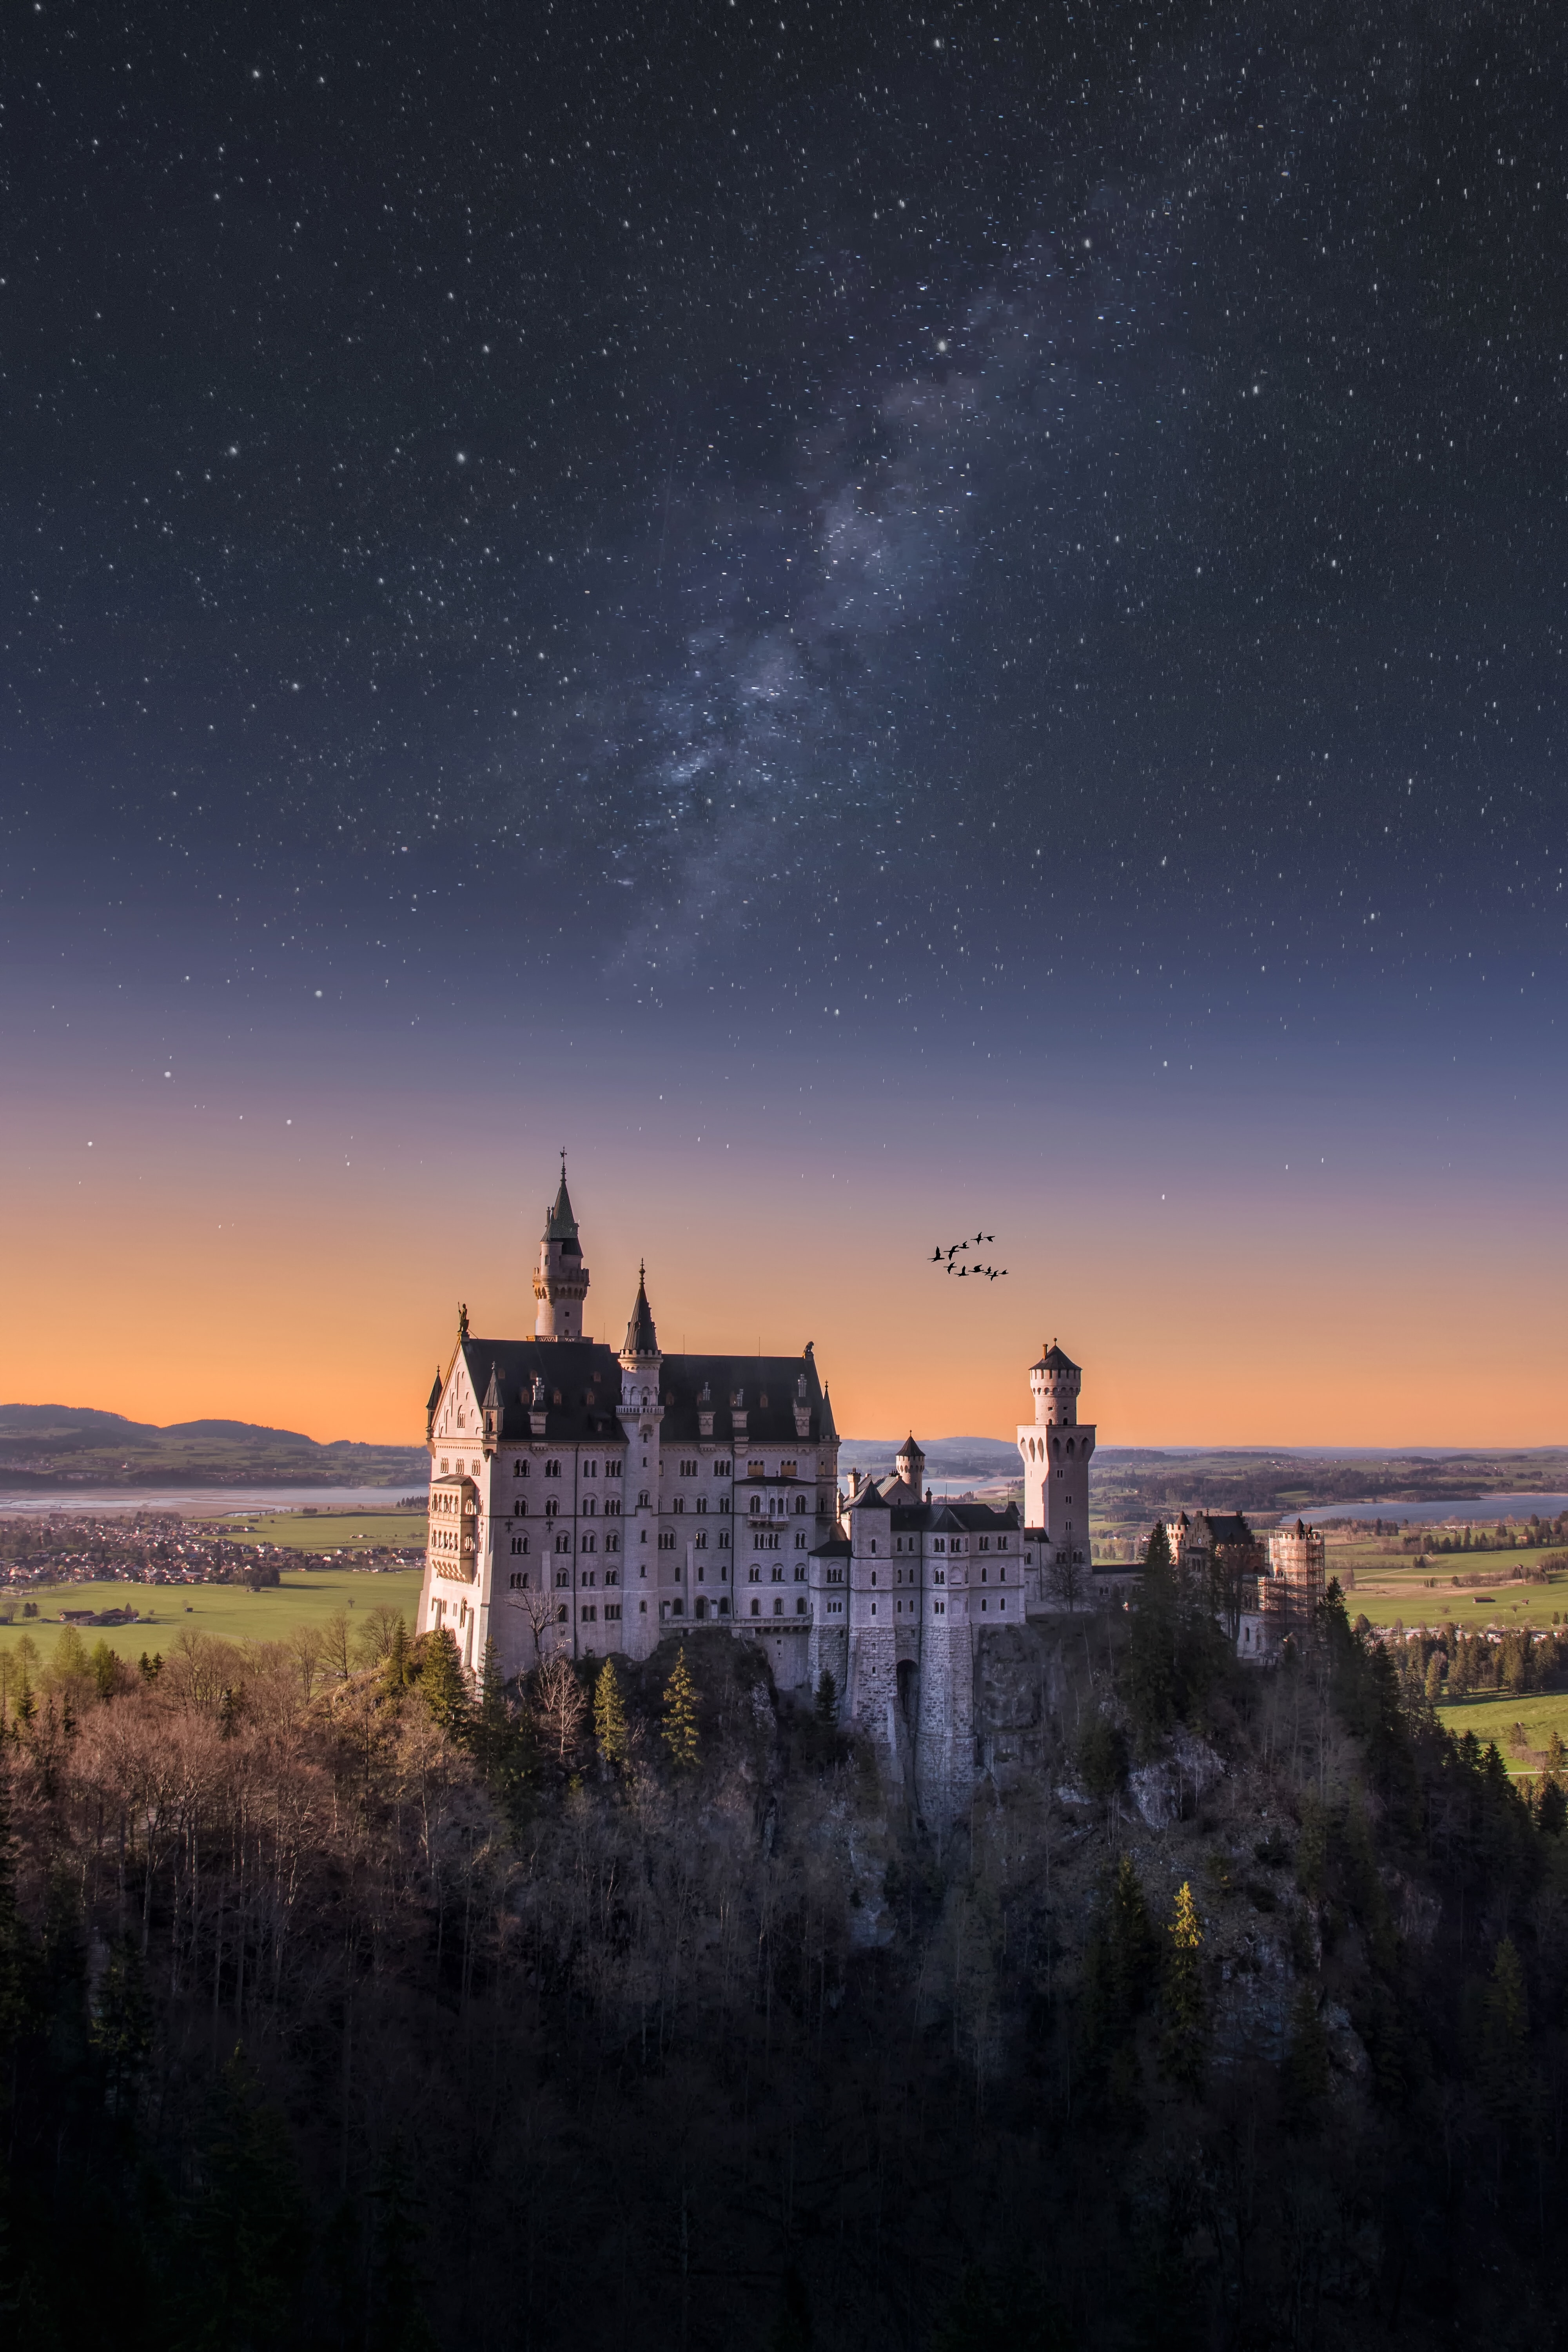 HD wallpaper, Outer Space, 5K, Stars, Germany, Astronomy, Landscape, Ancient Architecture, Neuschwanstein Castle, Starry Sky